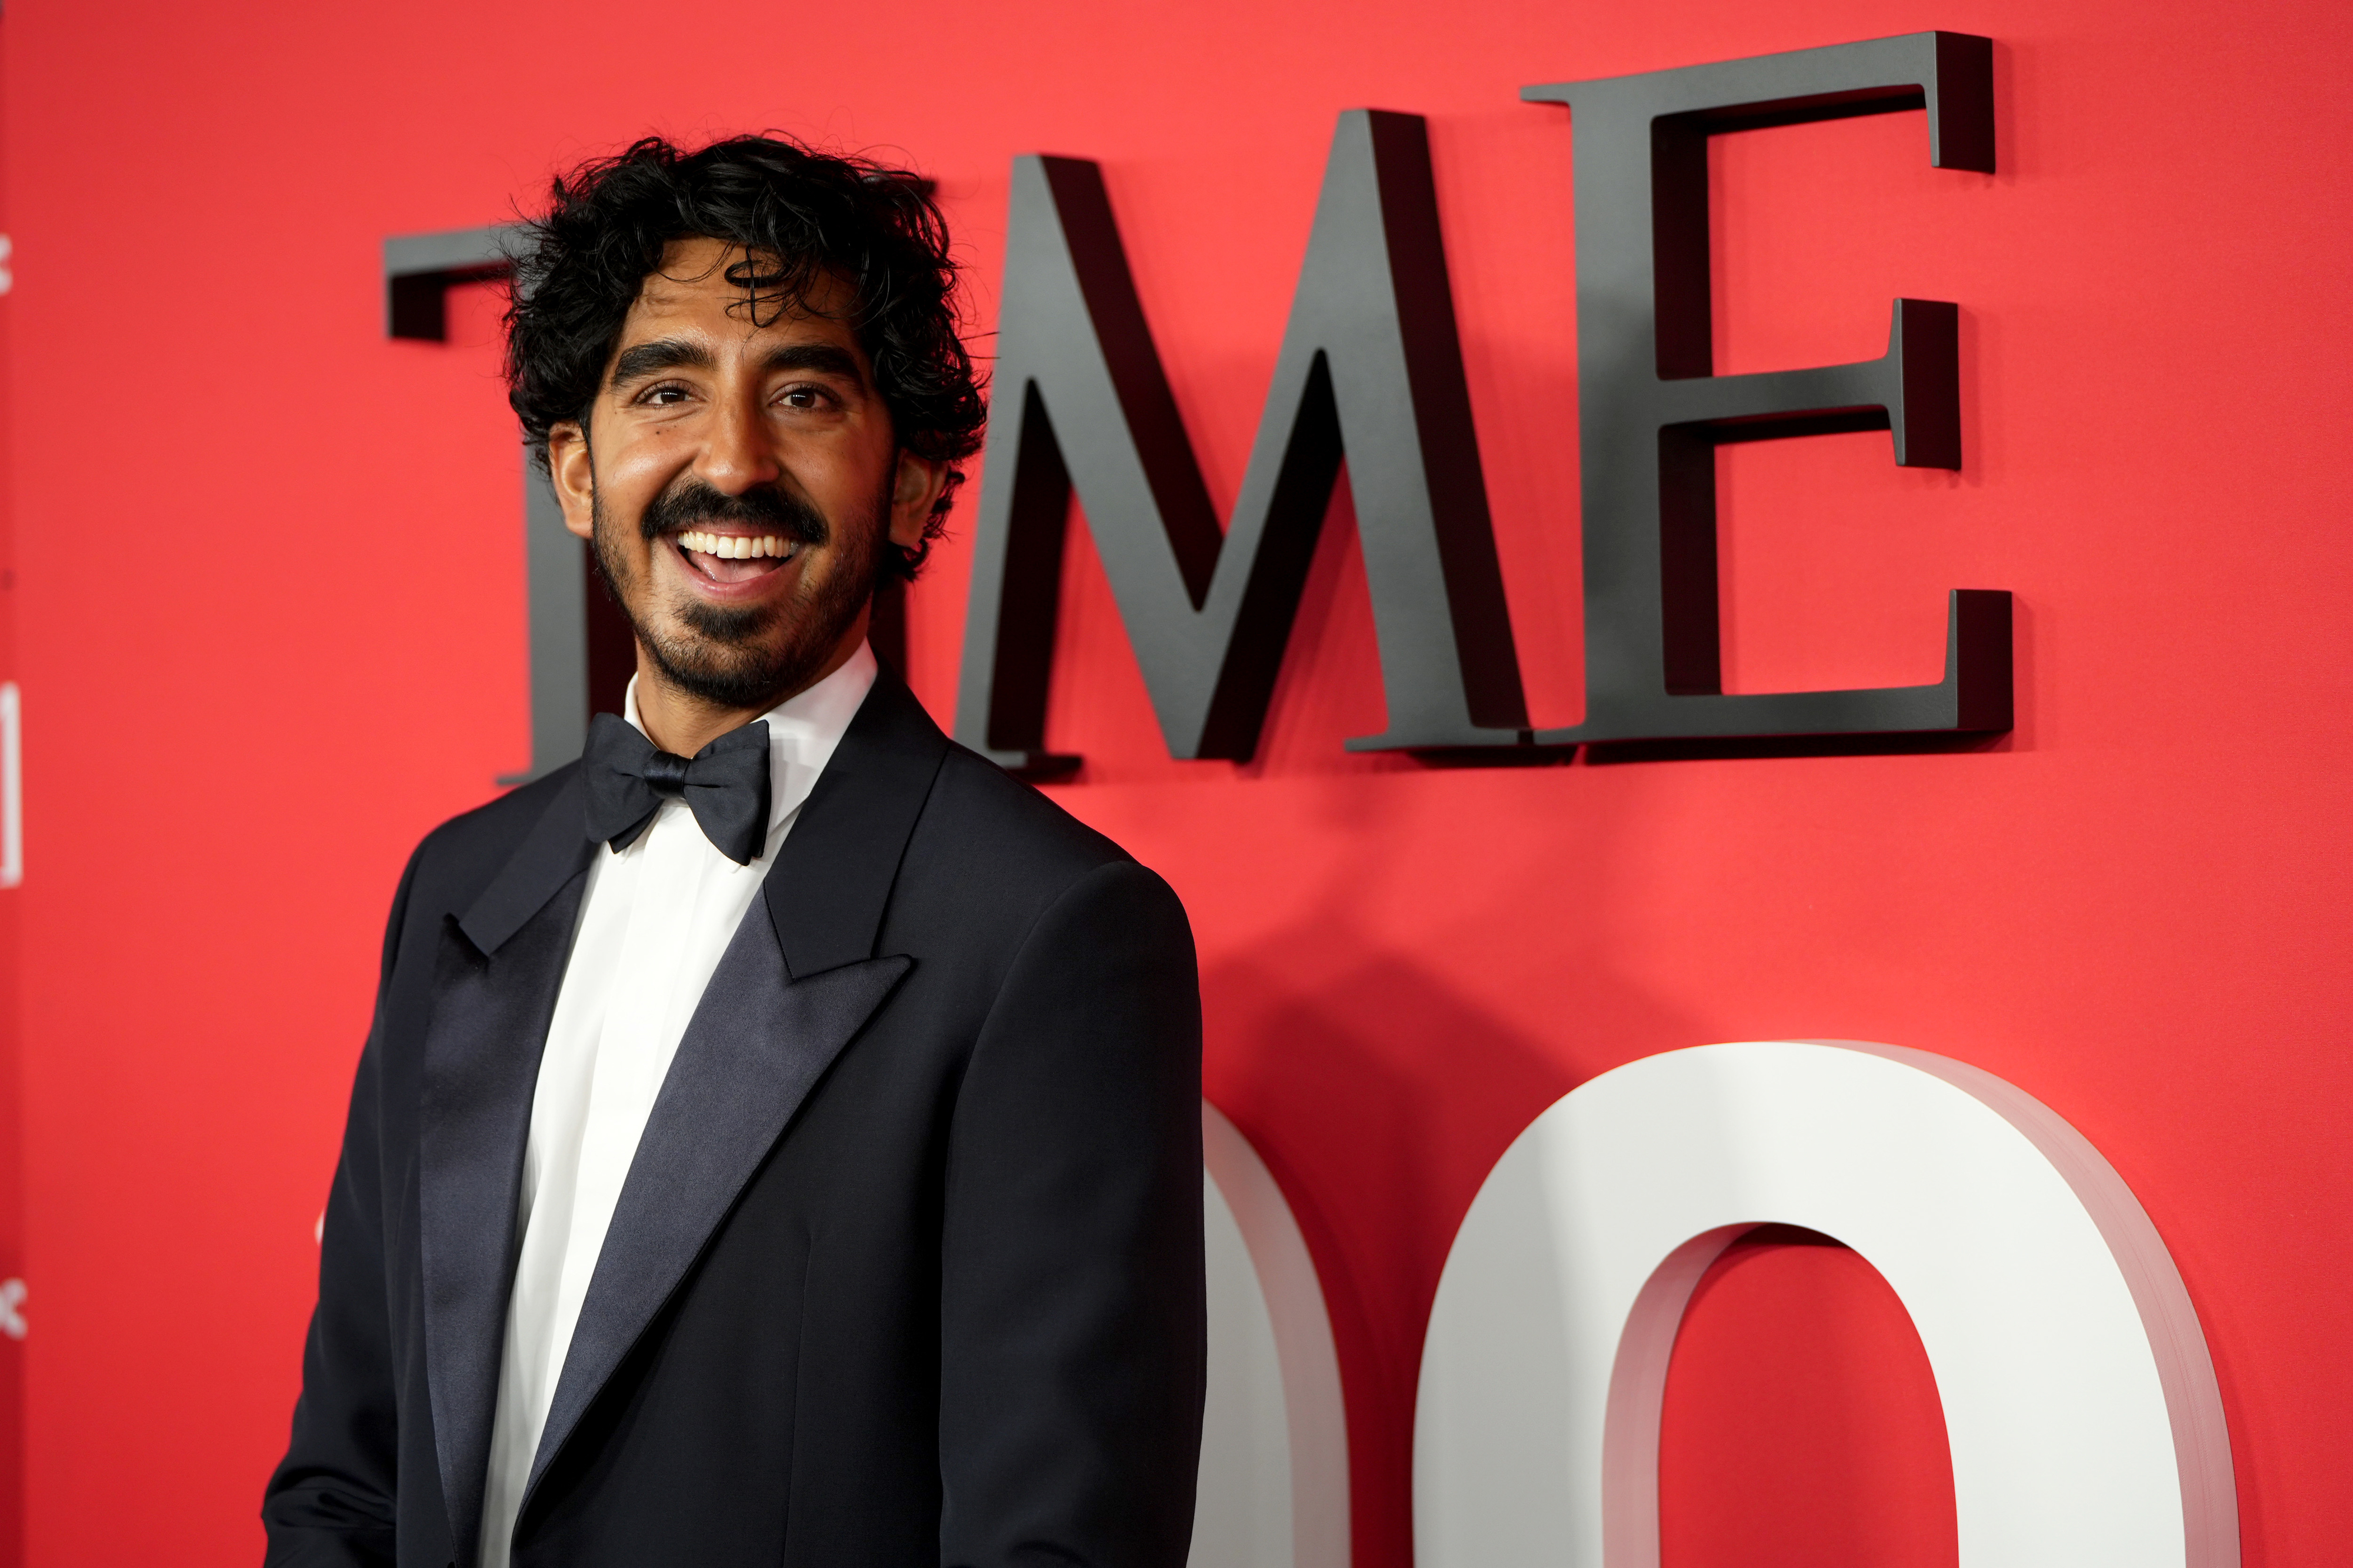 Dev Patel in a black tuxedo smiles on the red carpet by the TIME logo